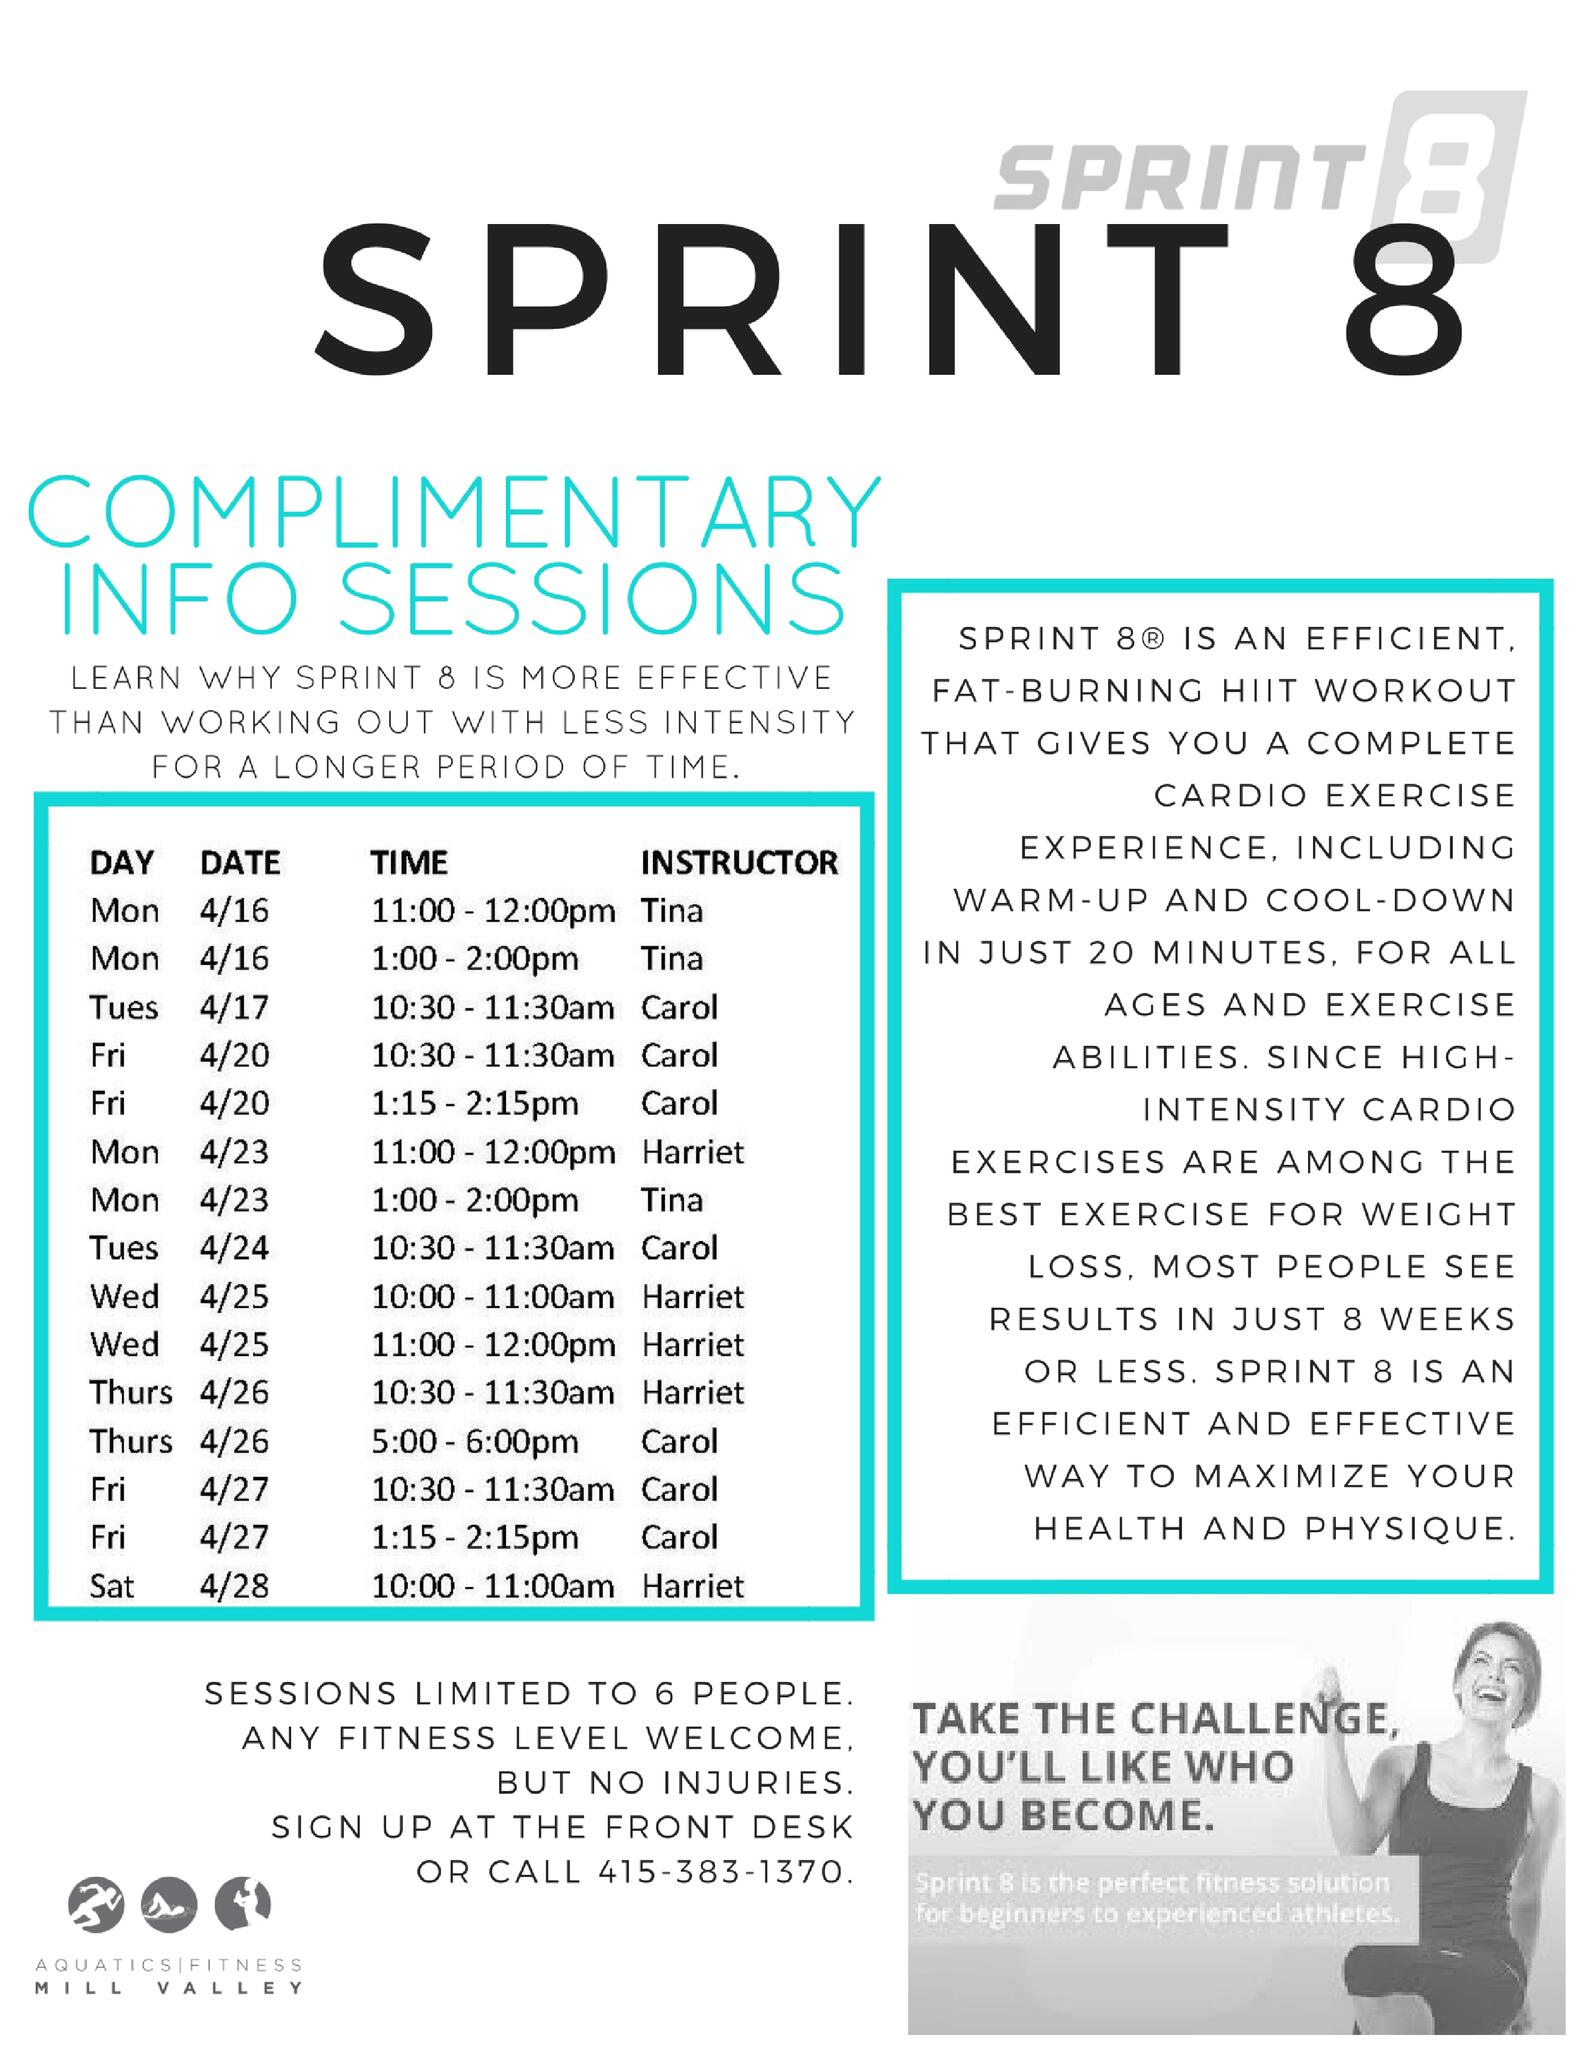 Complimentary Sprint 8 Training Info Sessions Available At